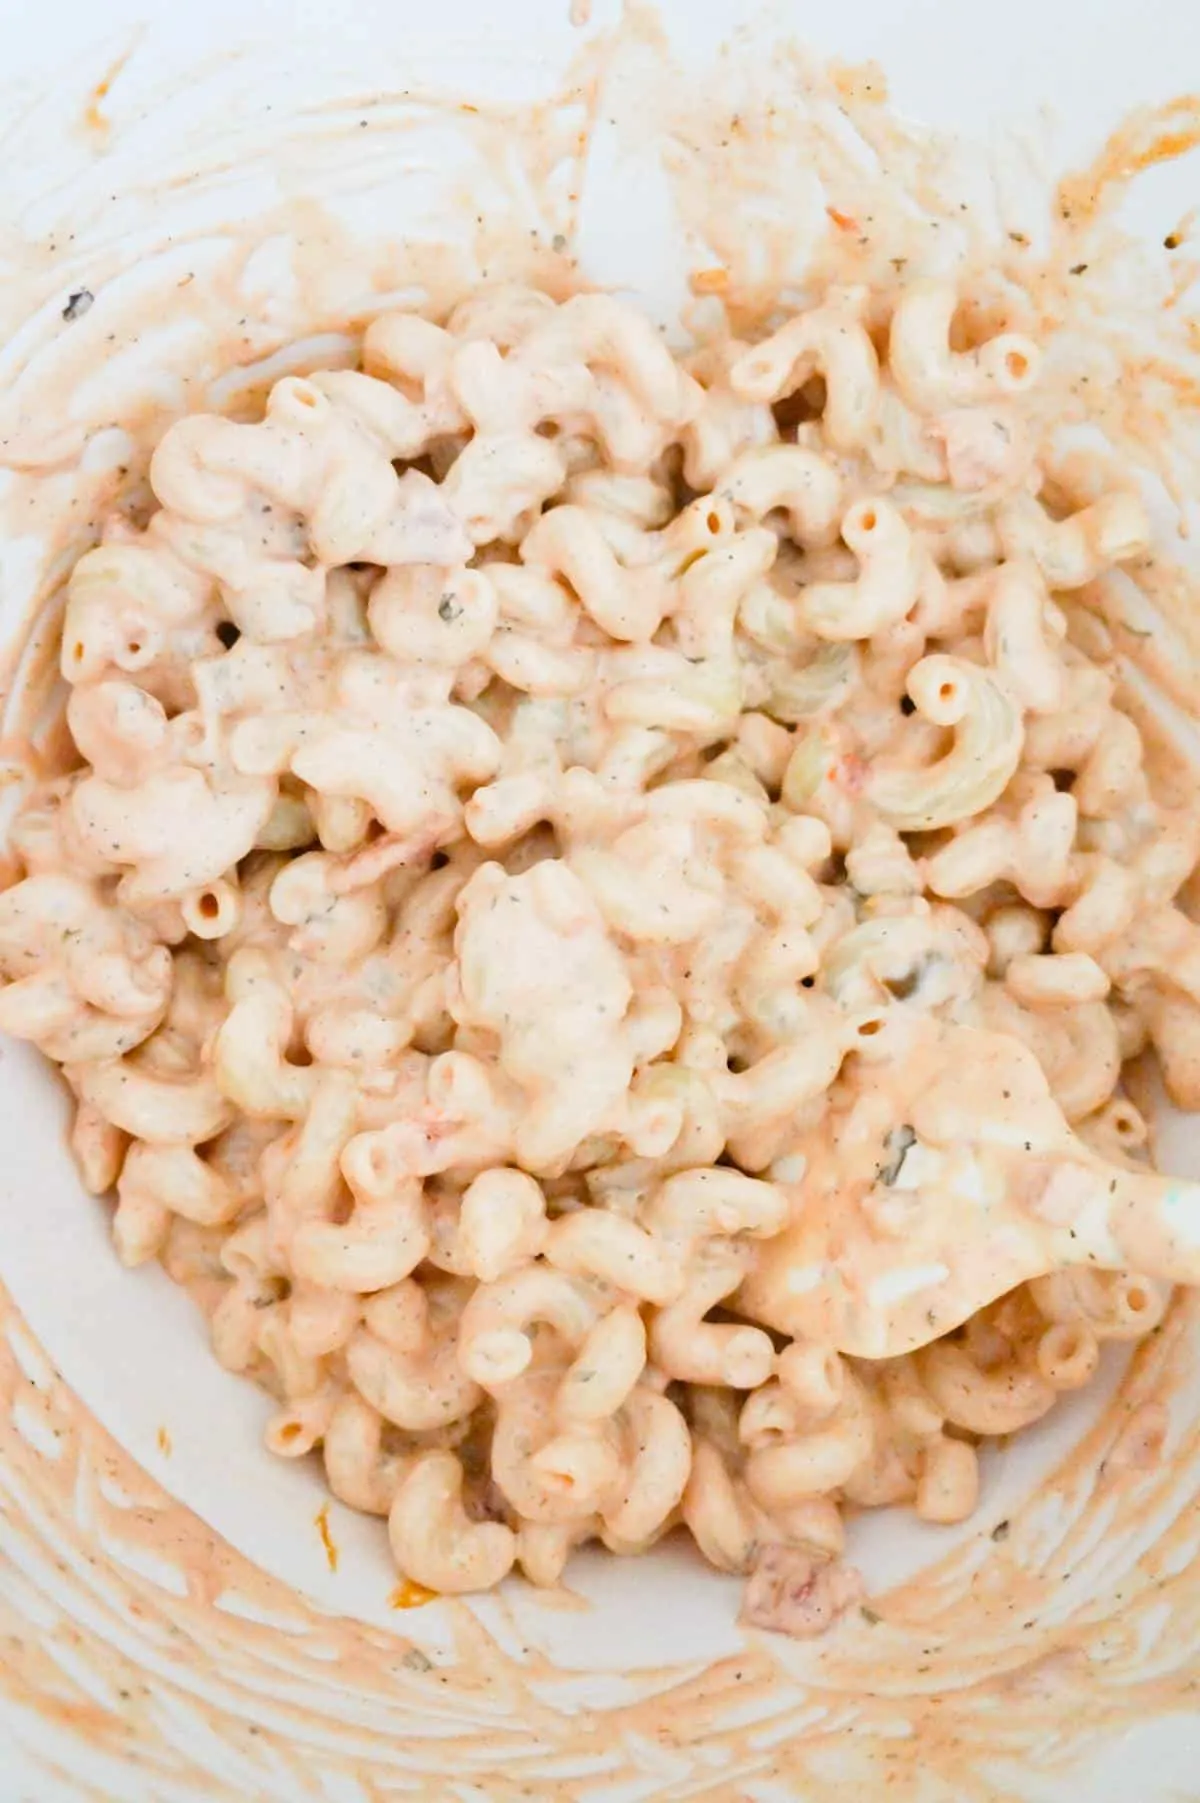 cavatappi noodles tossed in mayo, ranch dressing and salsa